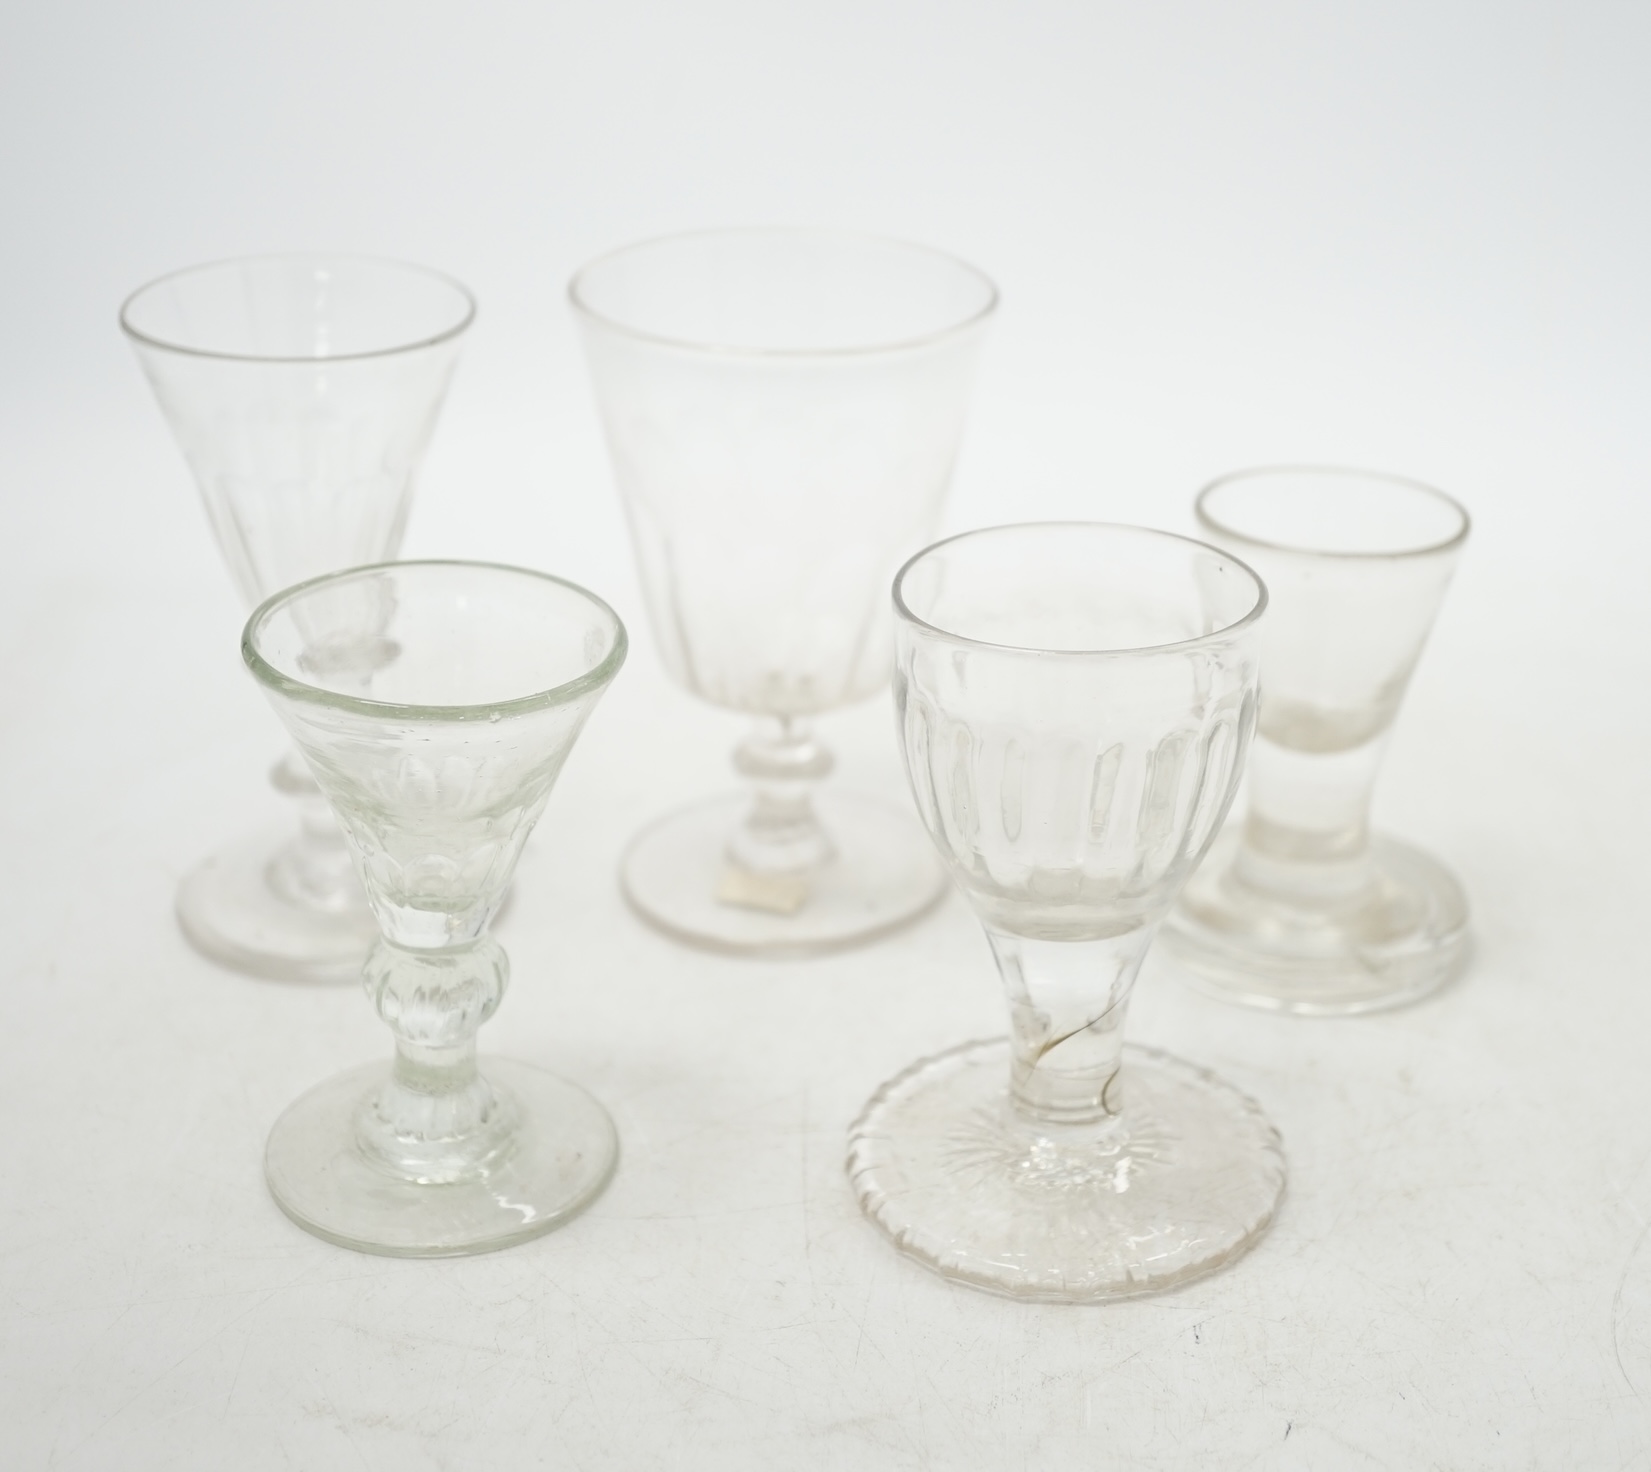 A mid 18th century wine glass with over-sewn foot and four others, three with knopped stems, tallest 10.5cm. Condition - good